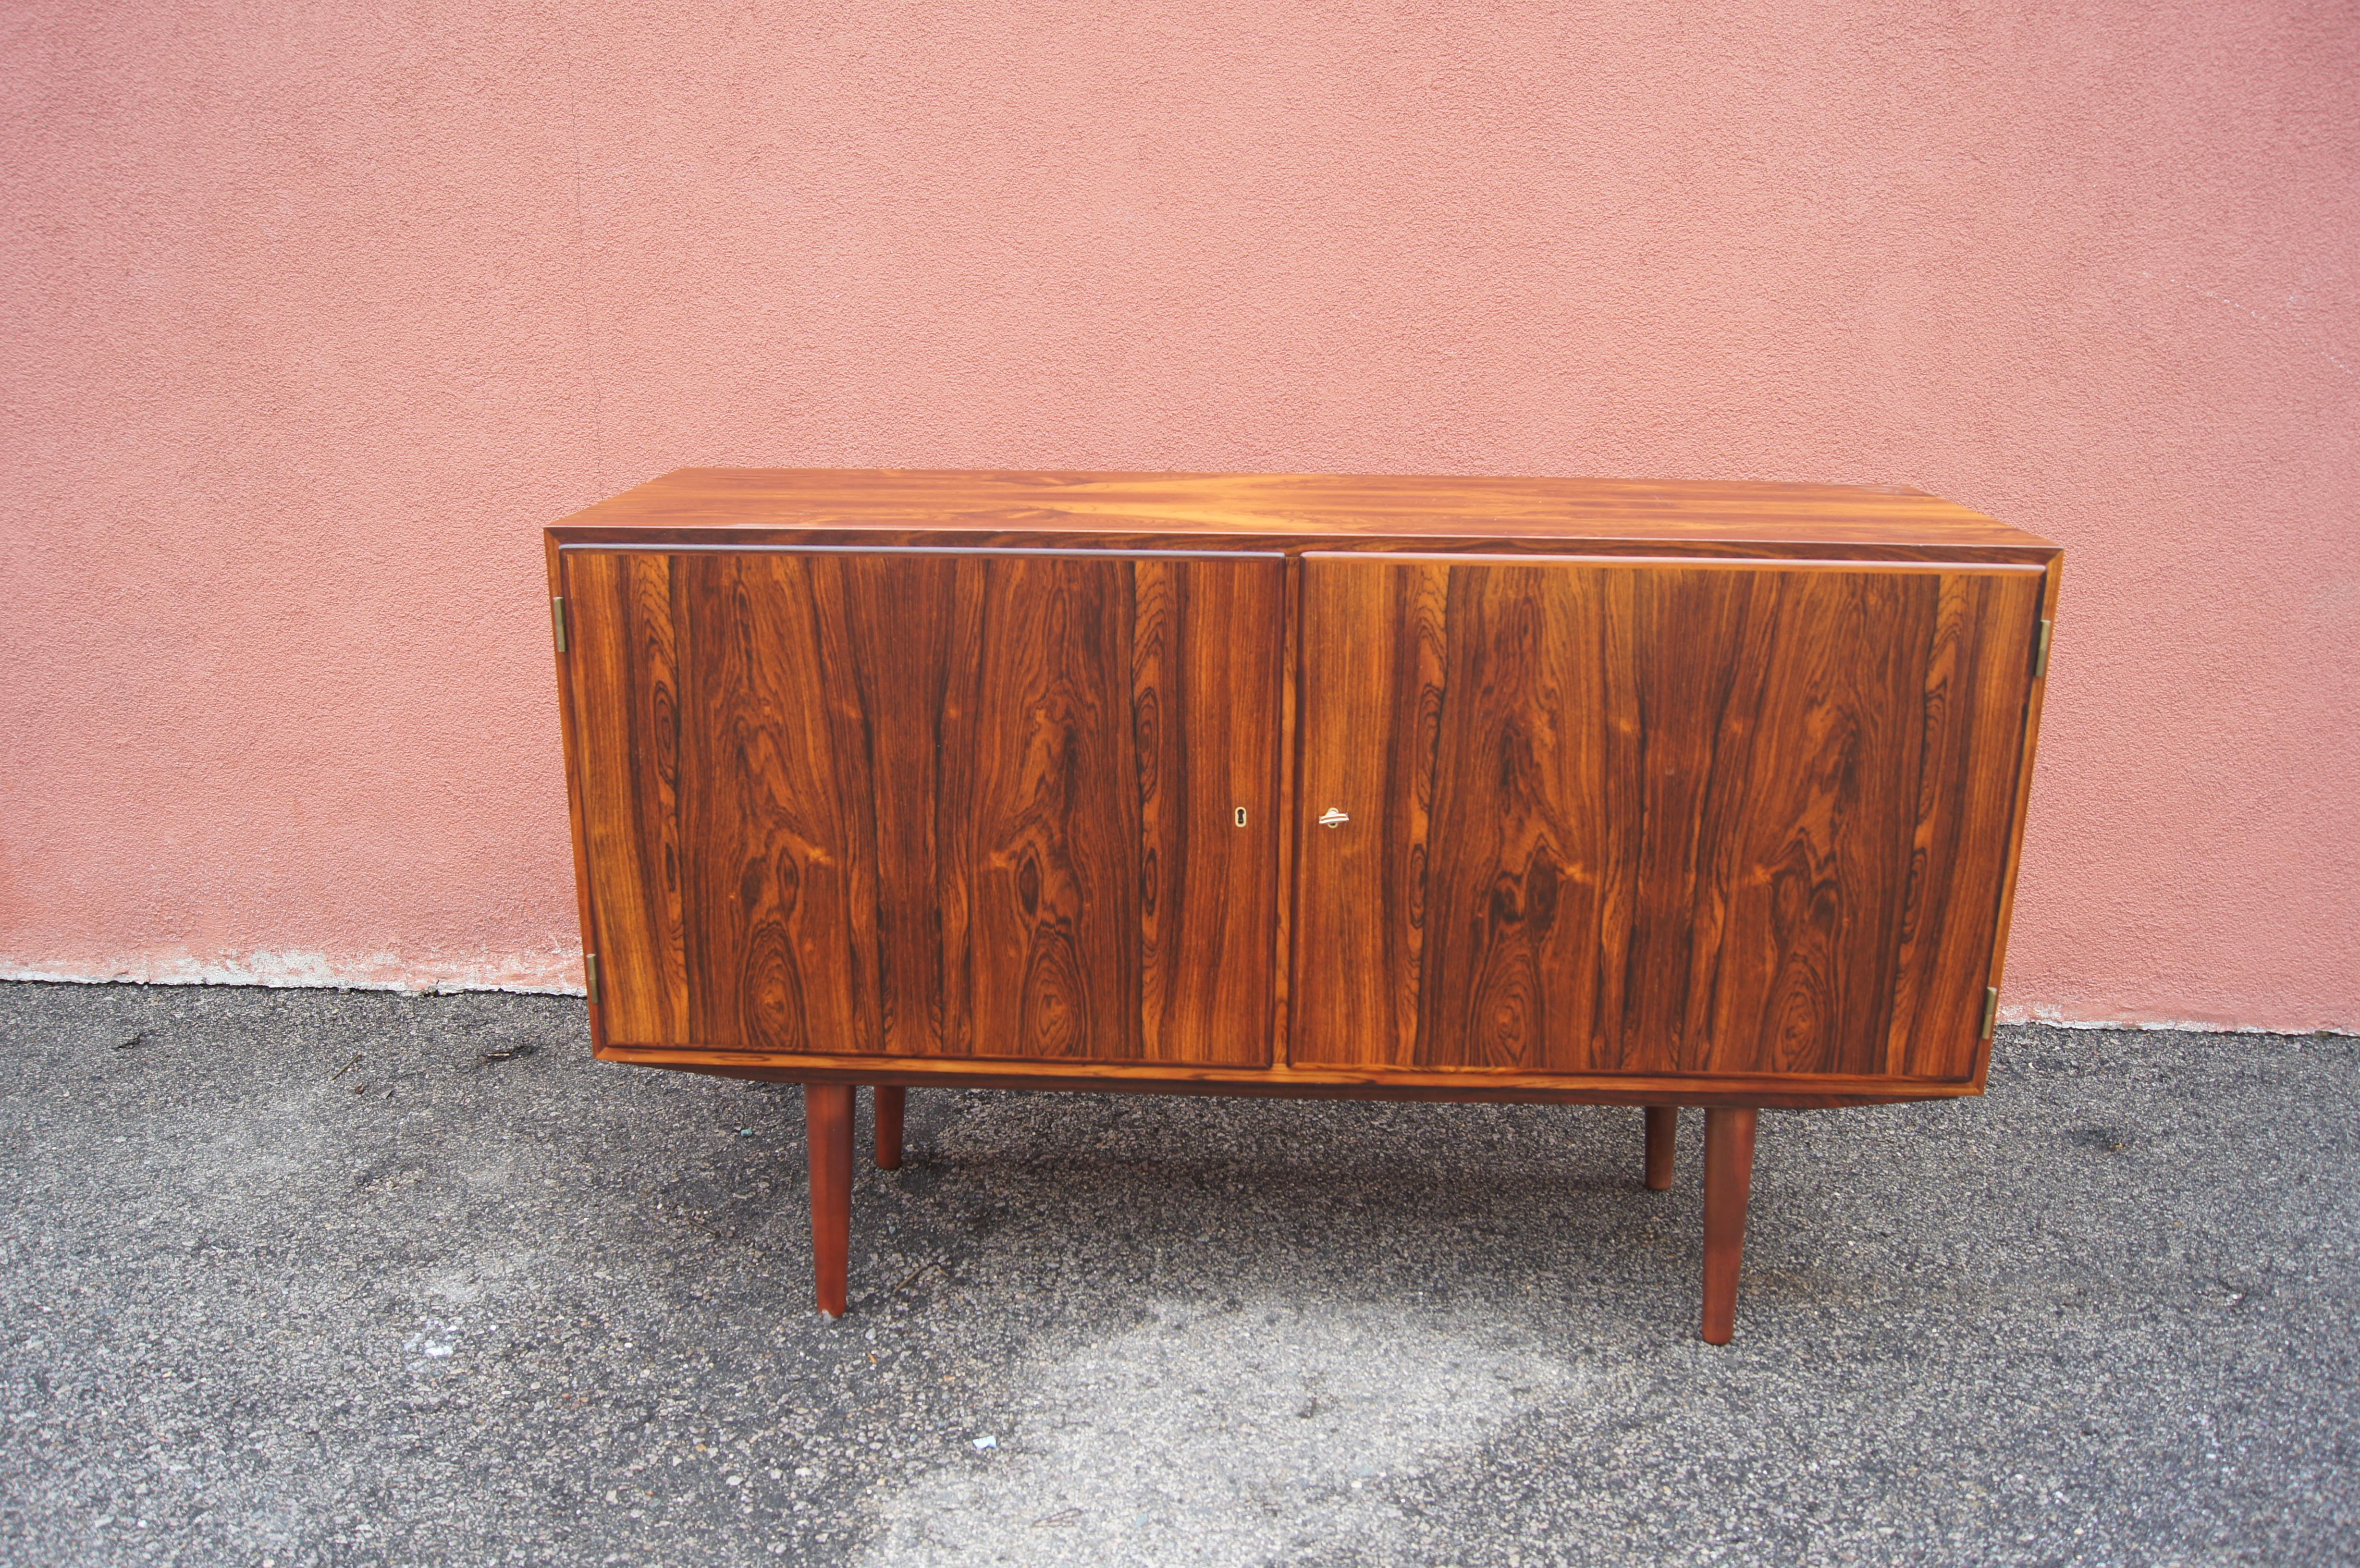 This Danish modern credenza comprises a small rosewood case on solid rosewood legs. Behind the two locking doors are three adjustable shelves on the right and four shallower felt-lined tray shelves on the left.

The two locks share the original key.